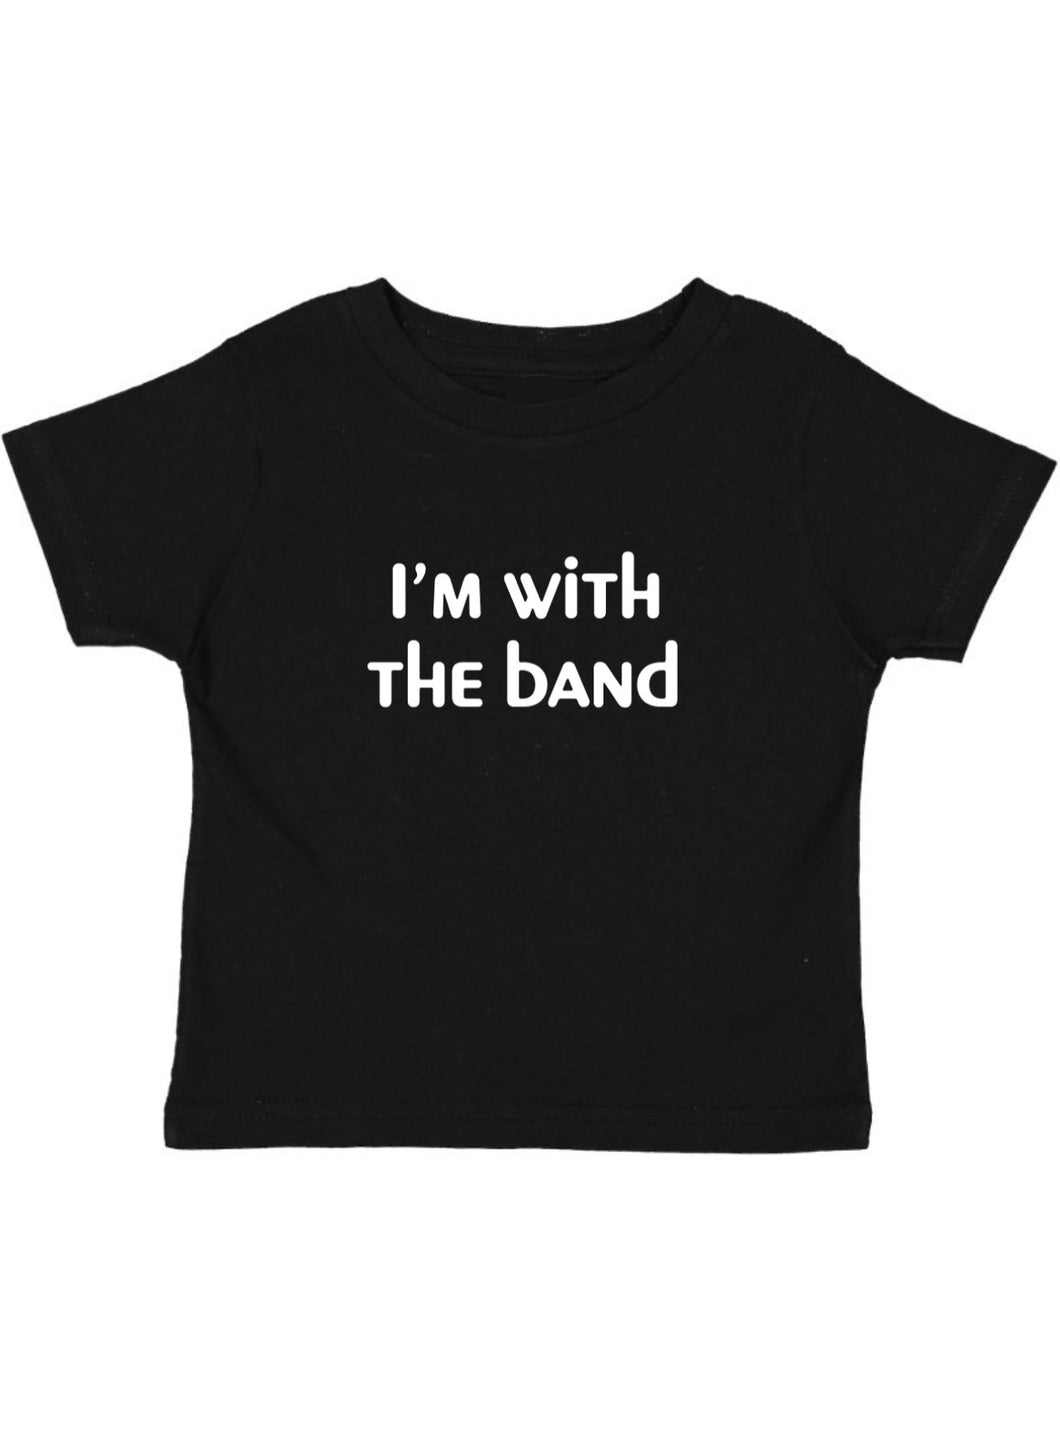 I'm with the band tee